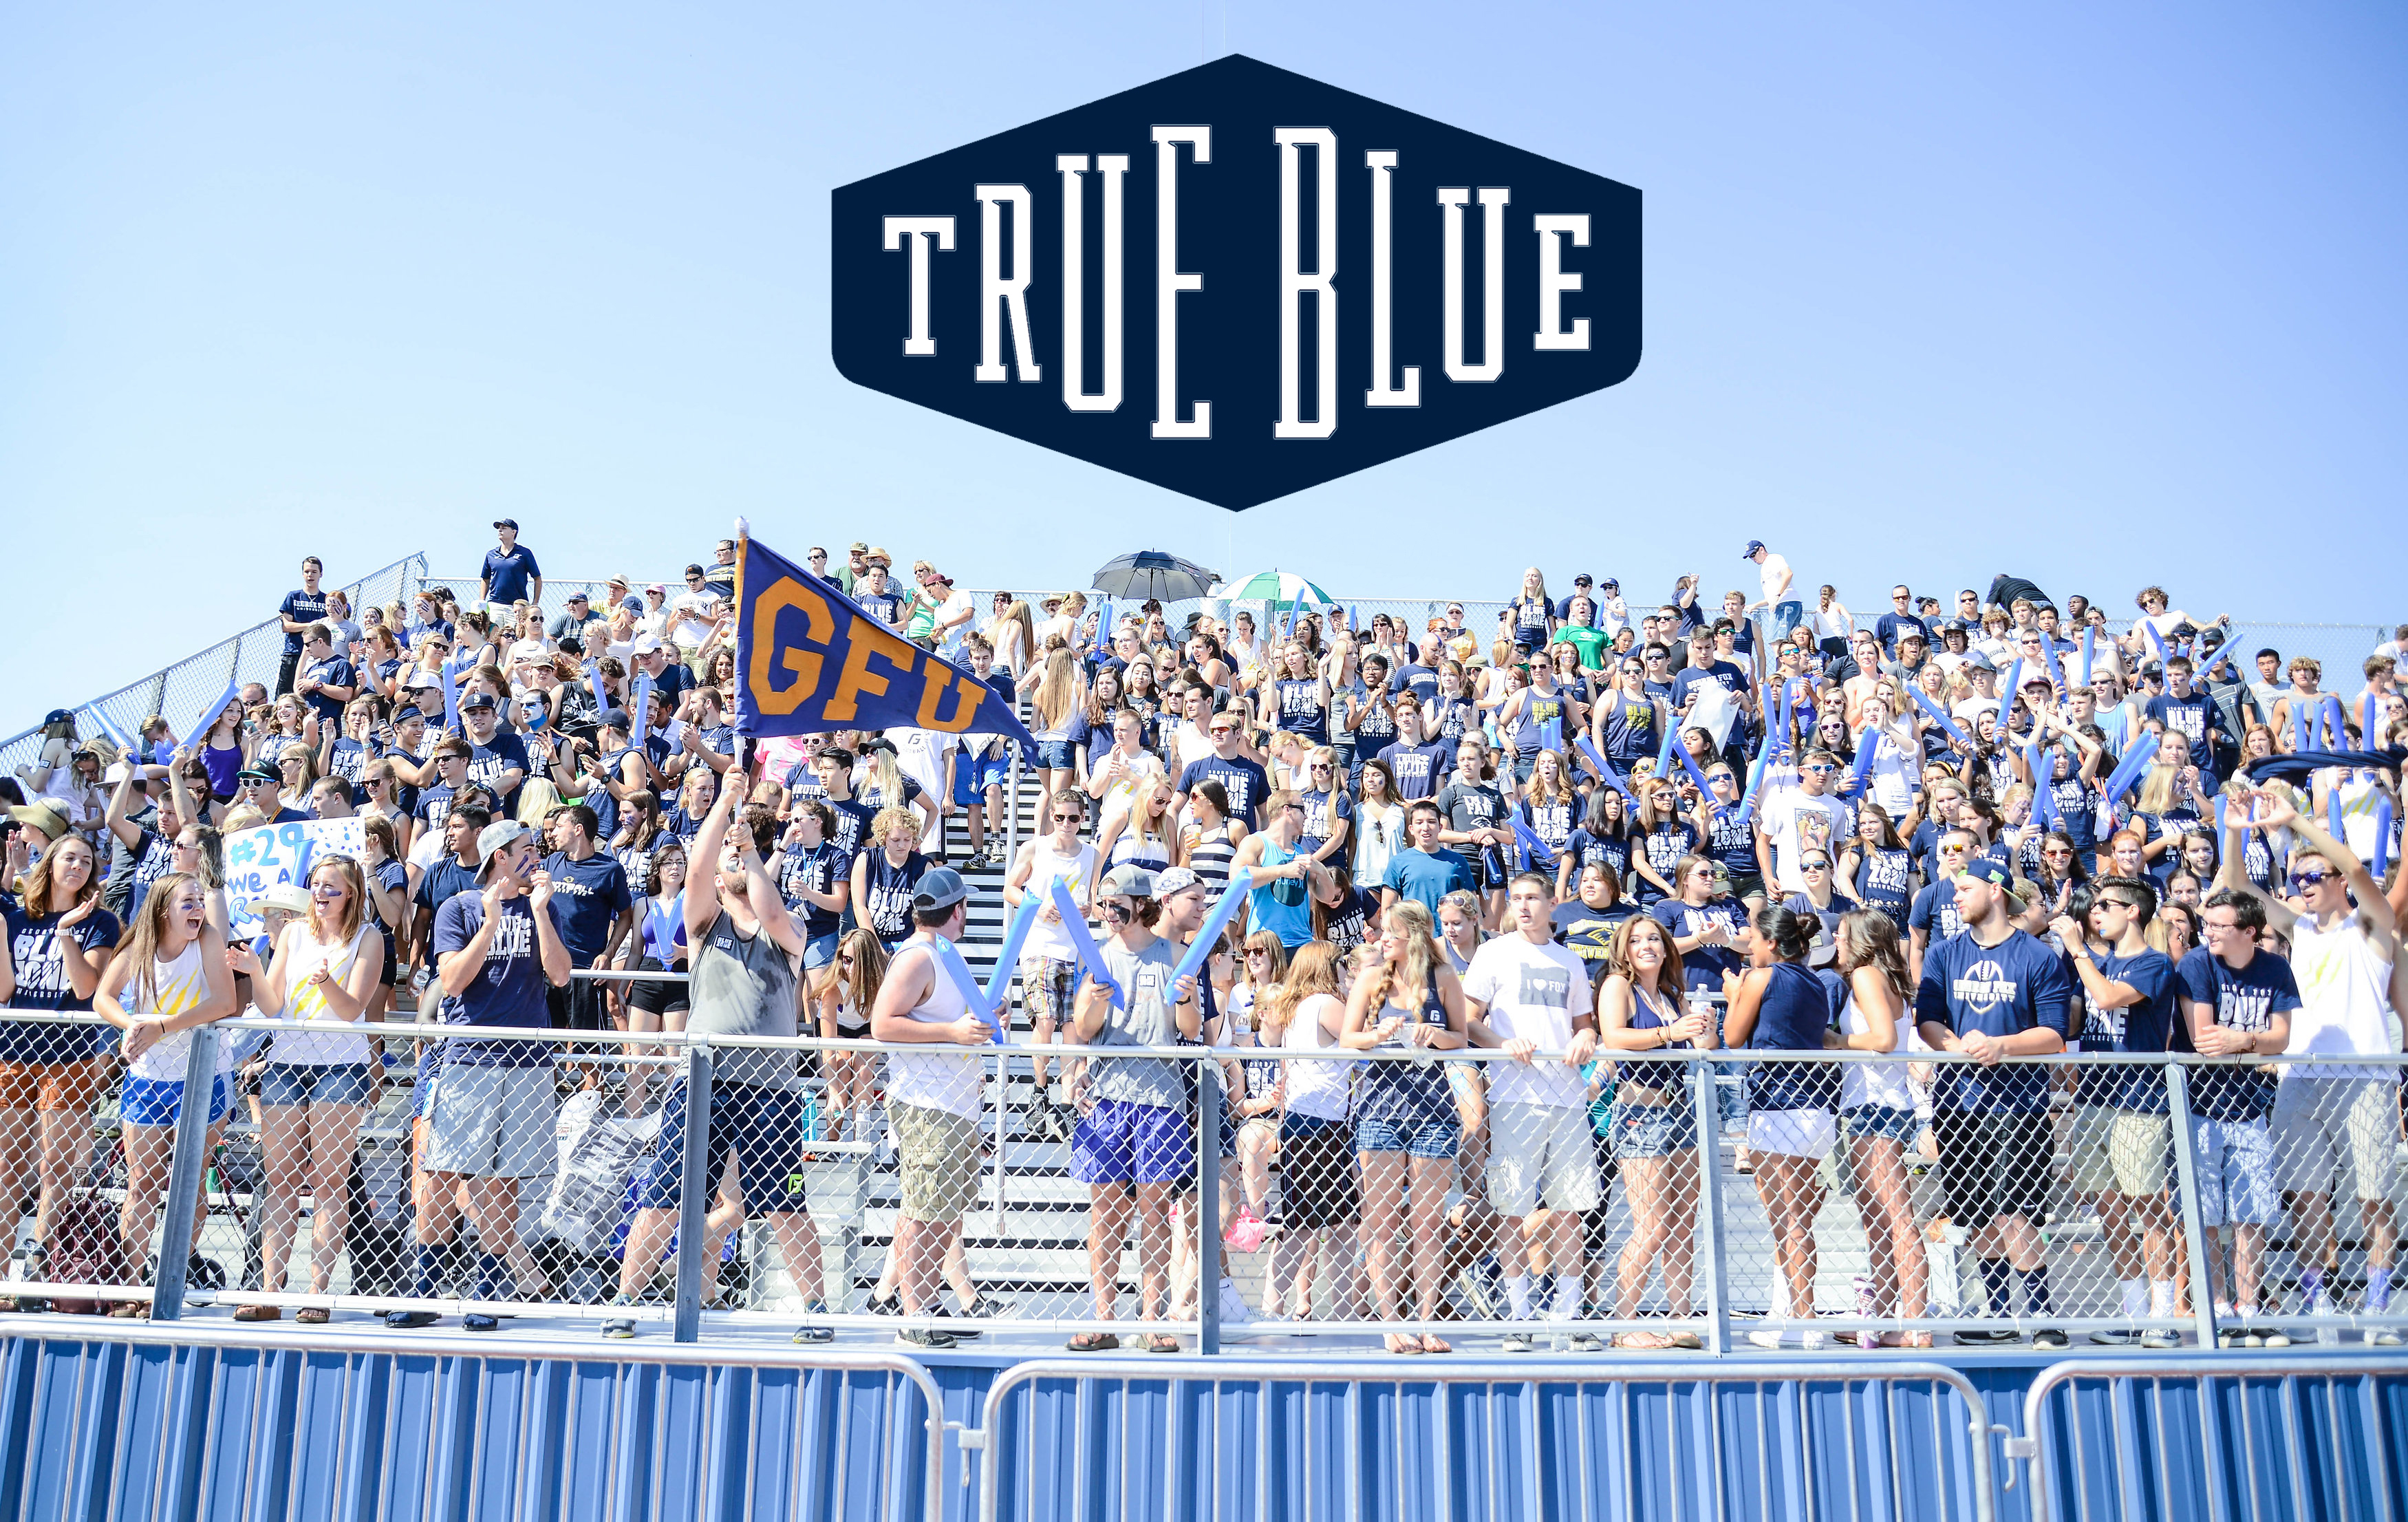 Who are the True Blue Bruins?